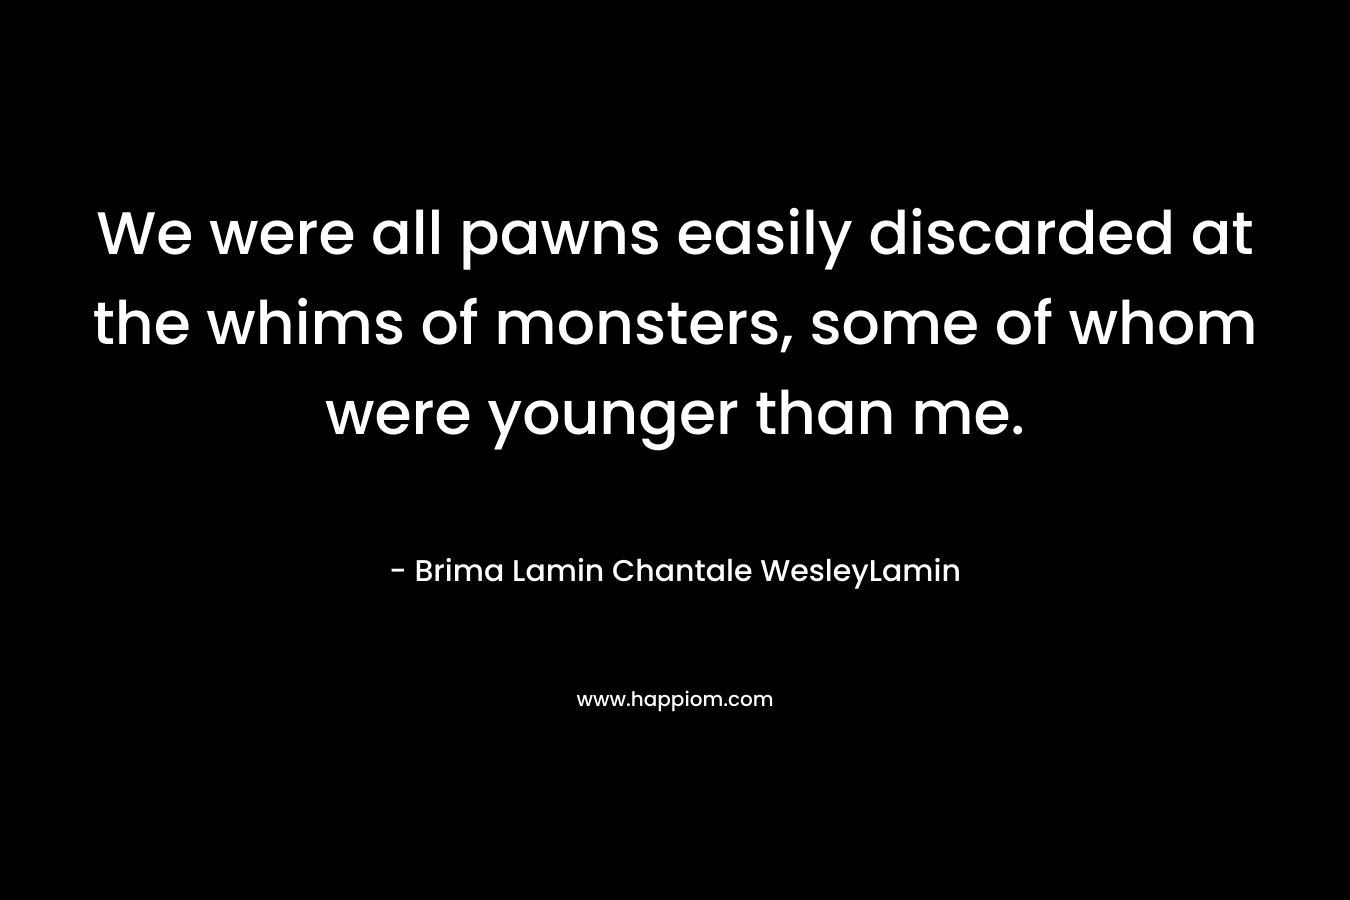 We were all pawns easily discarded at the whims of monsters, some of whom were younger than me. – Brima Lamin  Chantale WesleyLamin